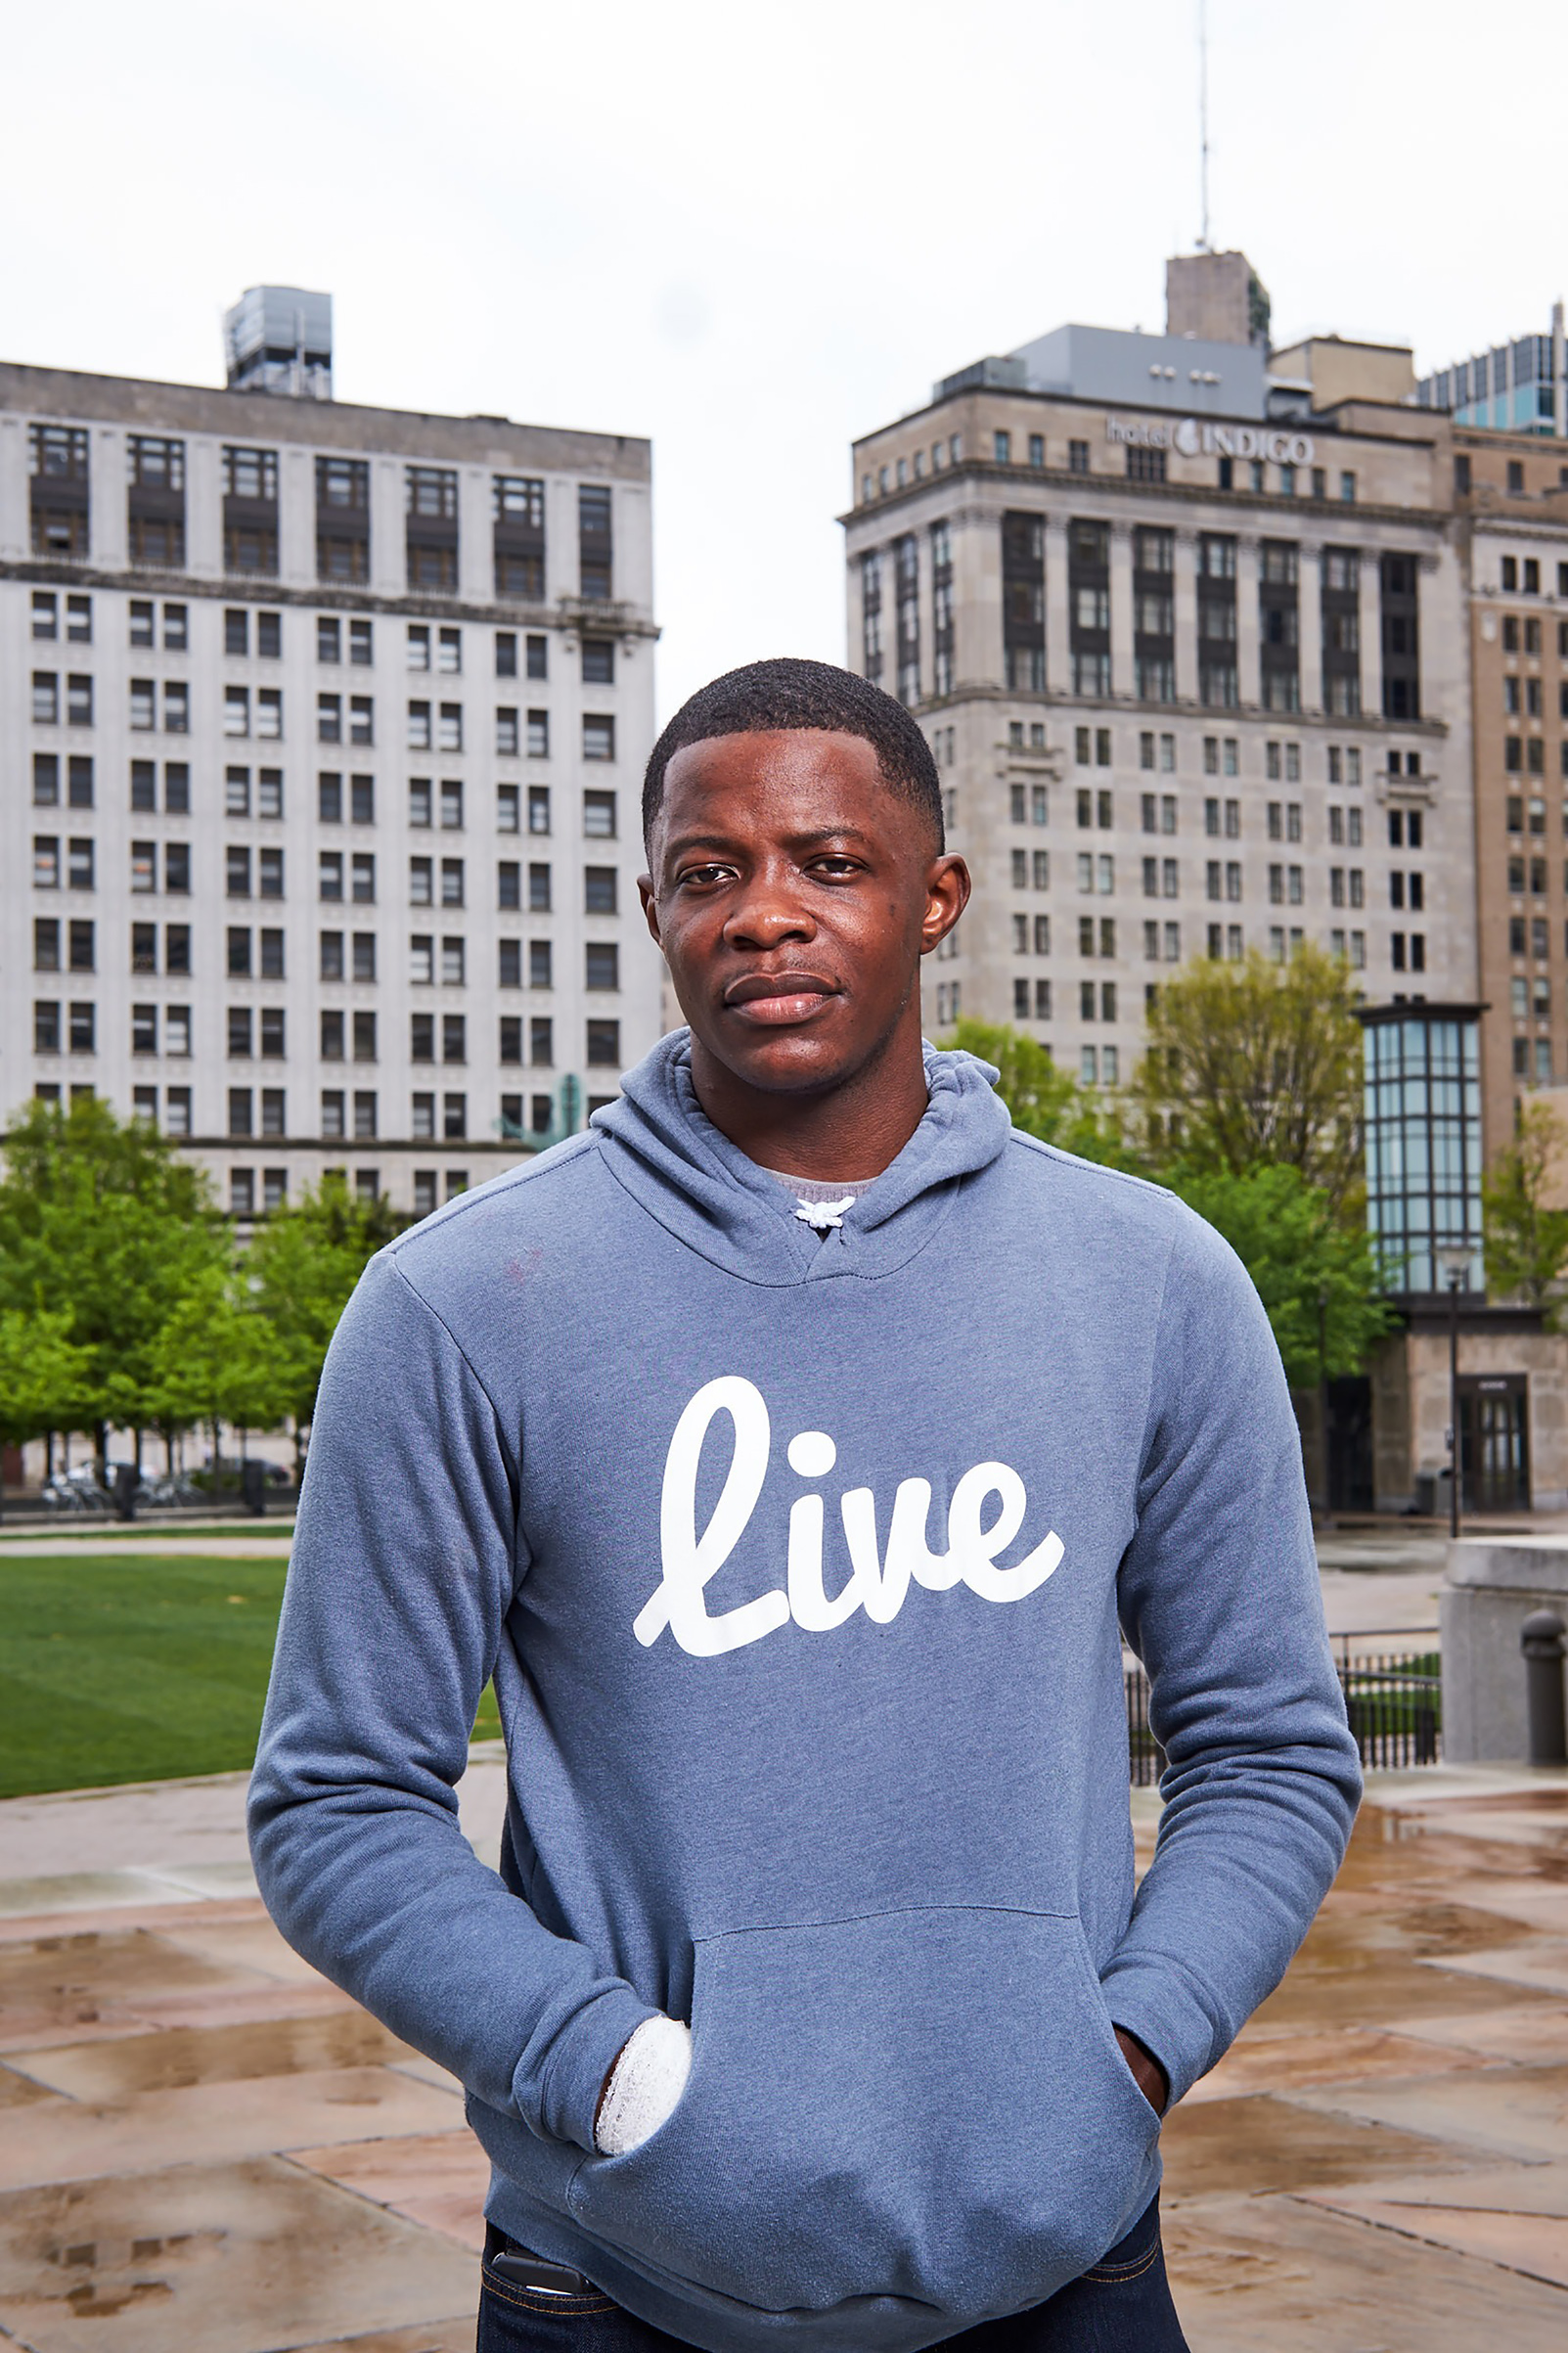 James Shaw Jr., who disarmed the man who opened fire at a Waffle House Sunday morning, in Nashville on April 23, 2018. (Shawn Poynter—The New York Times/Redux)